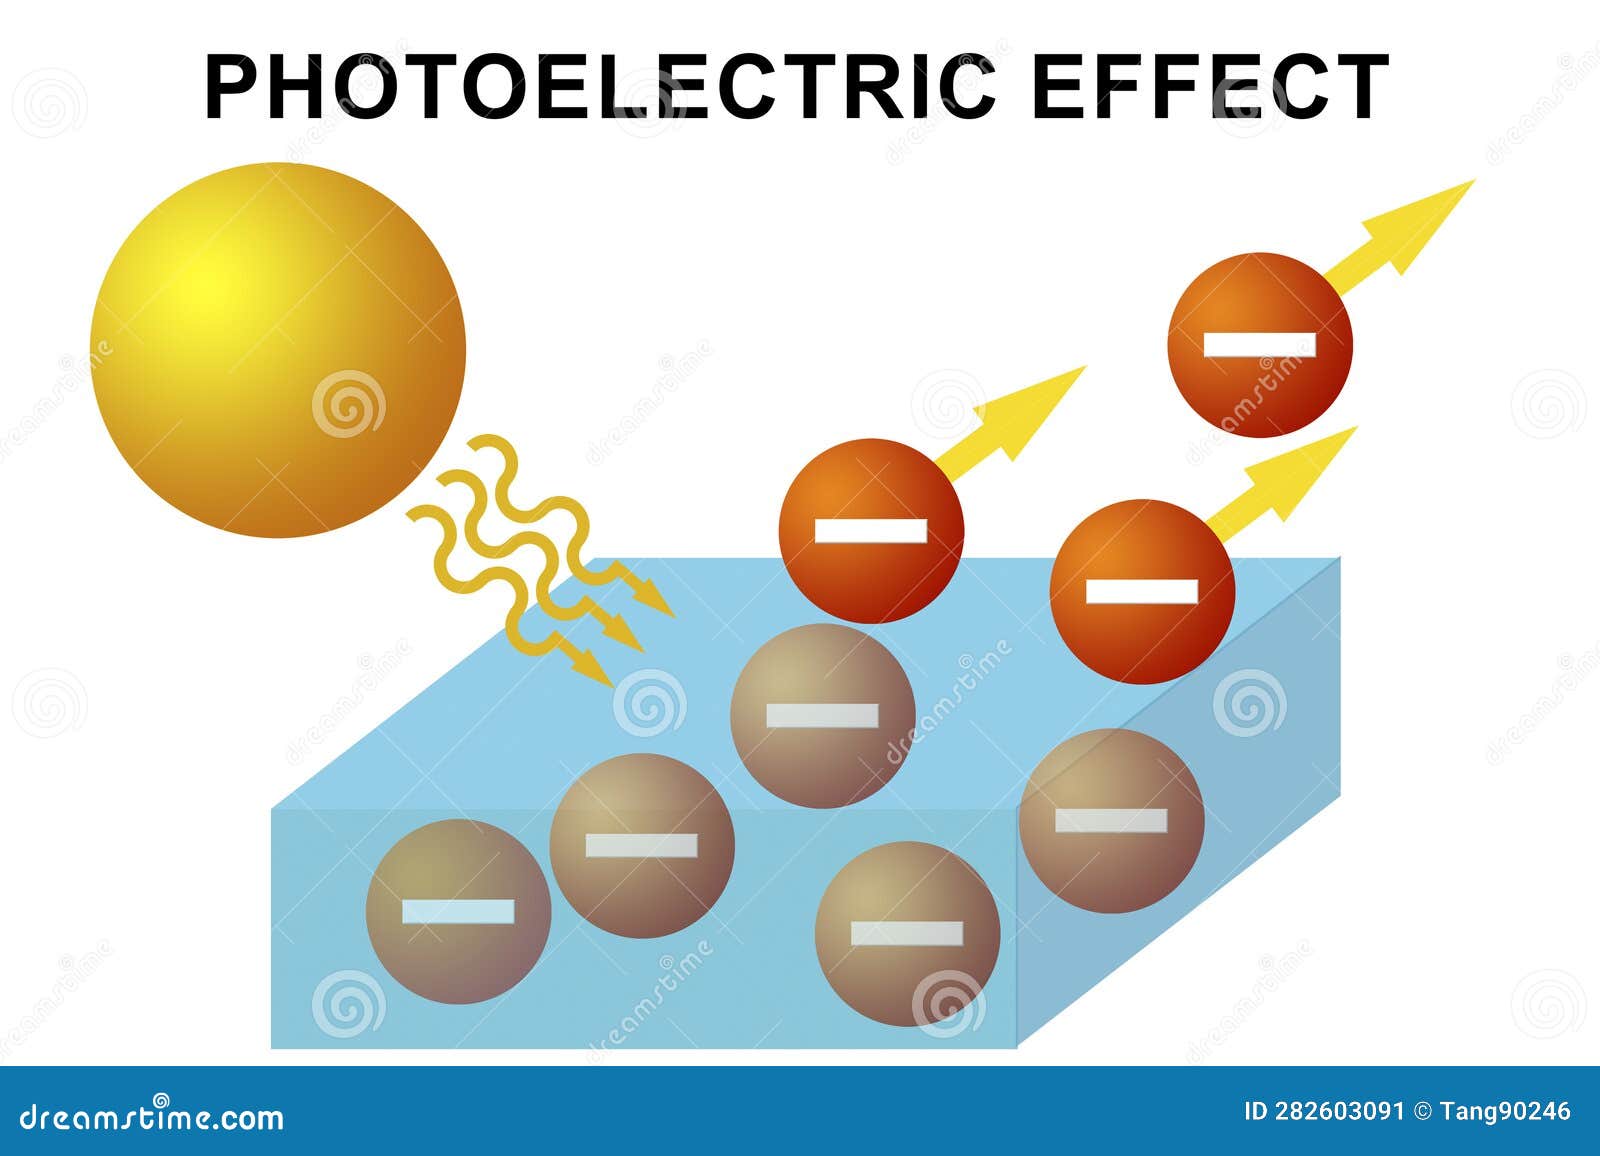 photoelectric effect diagram  on white background